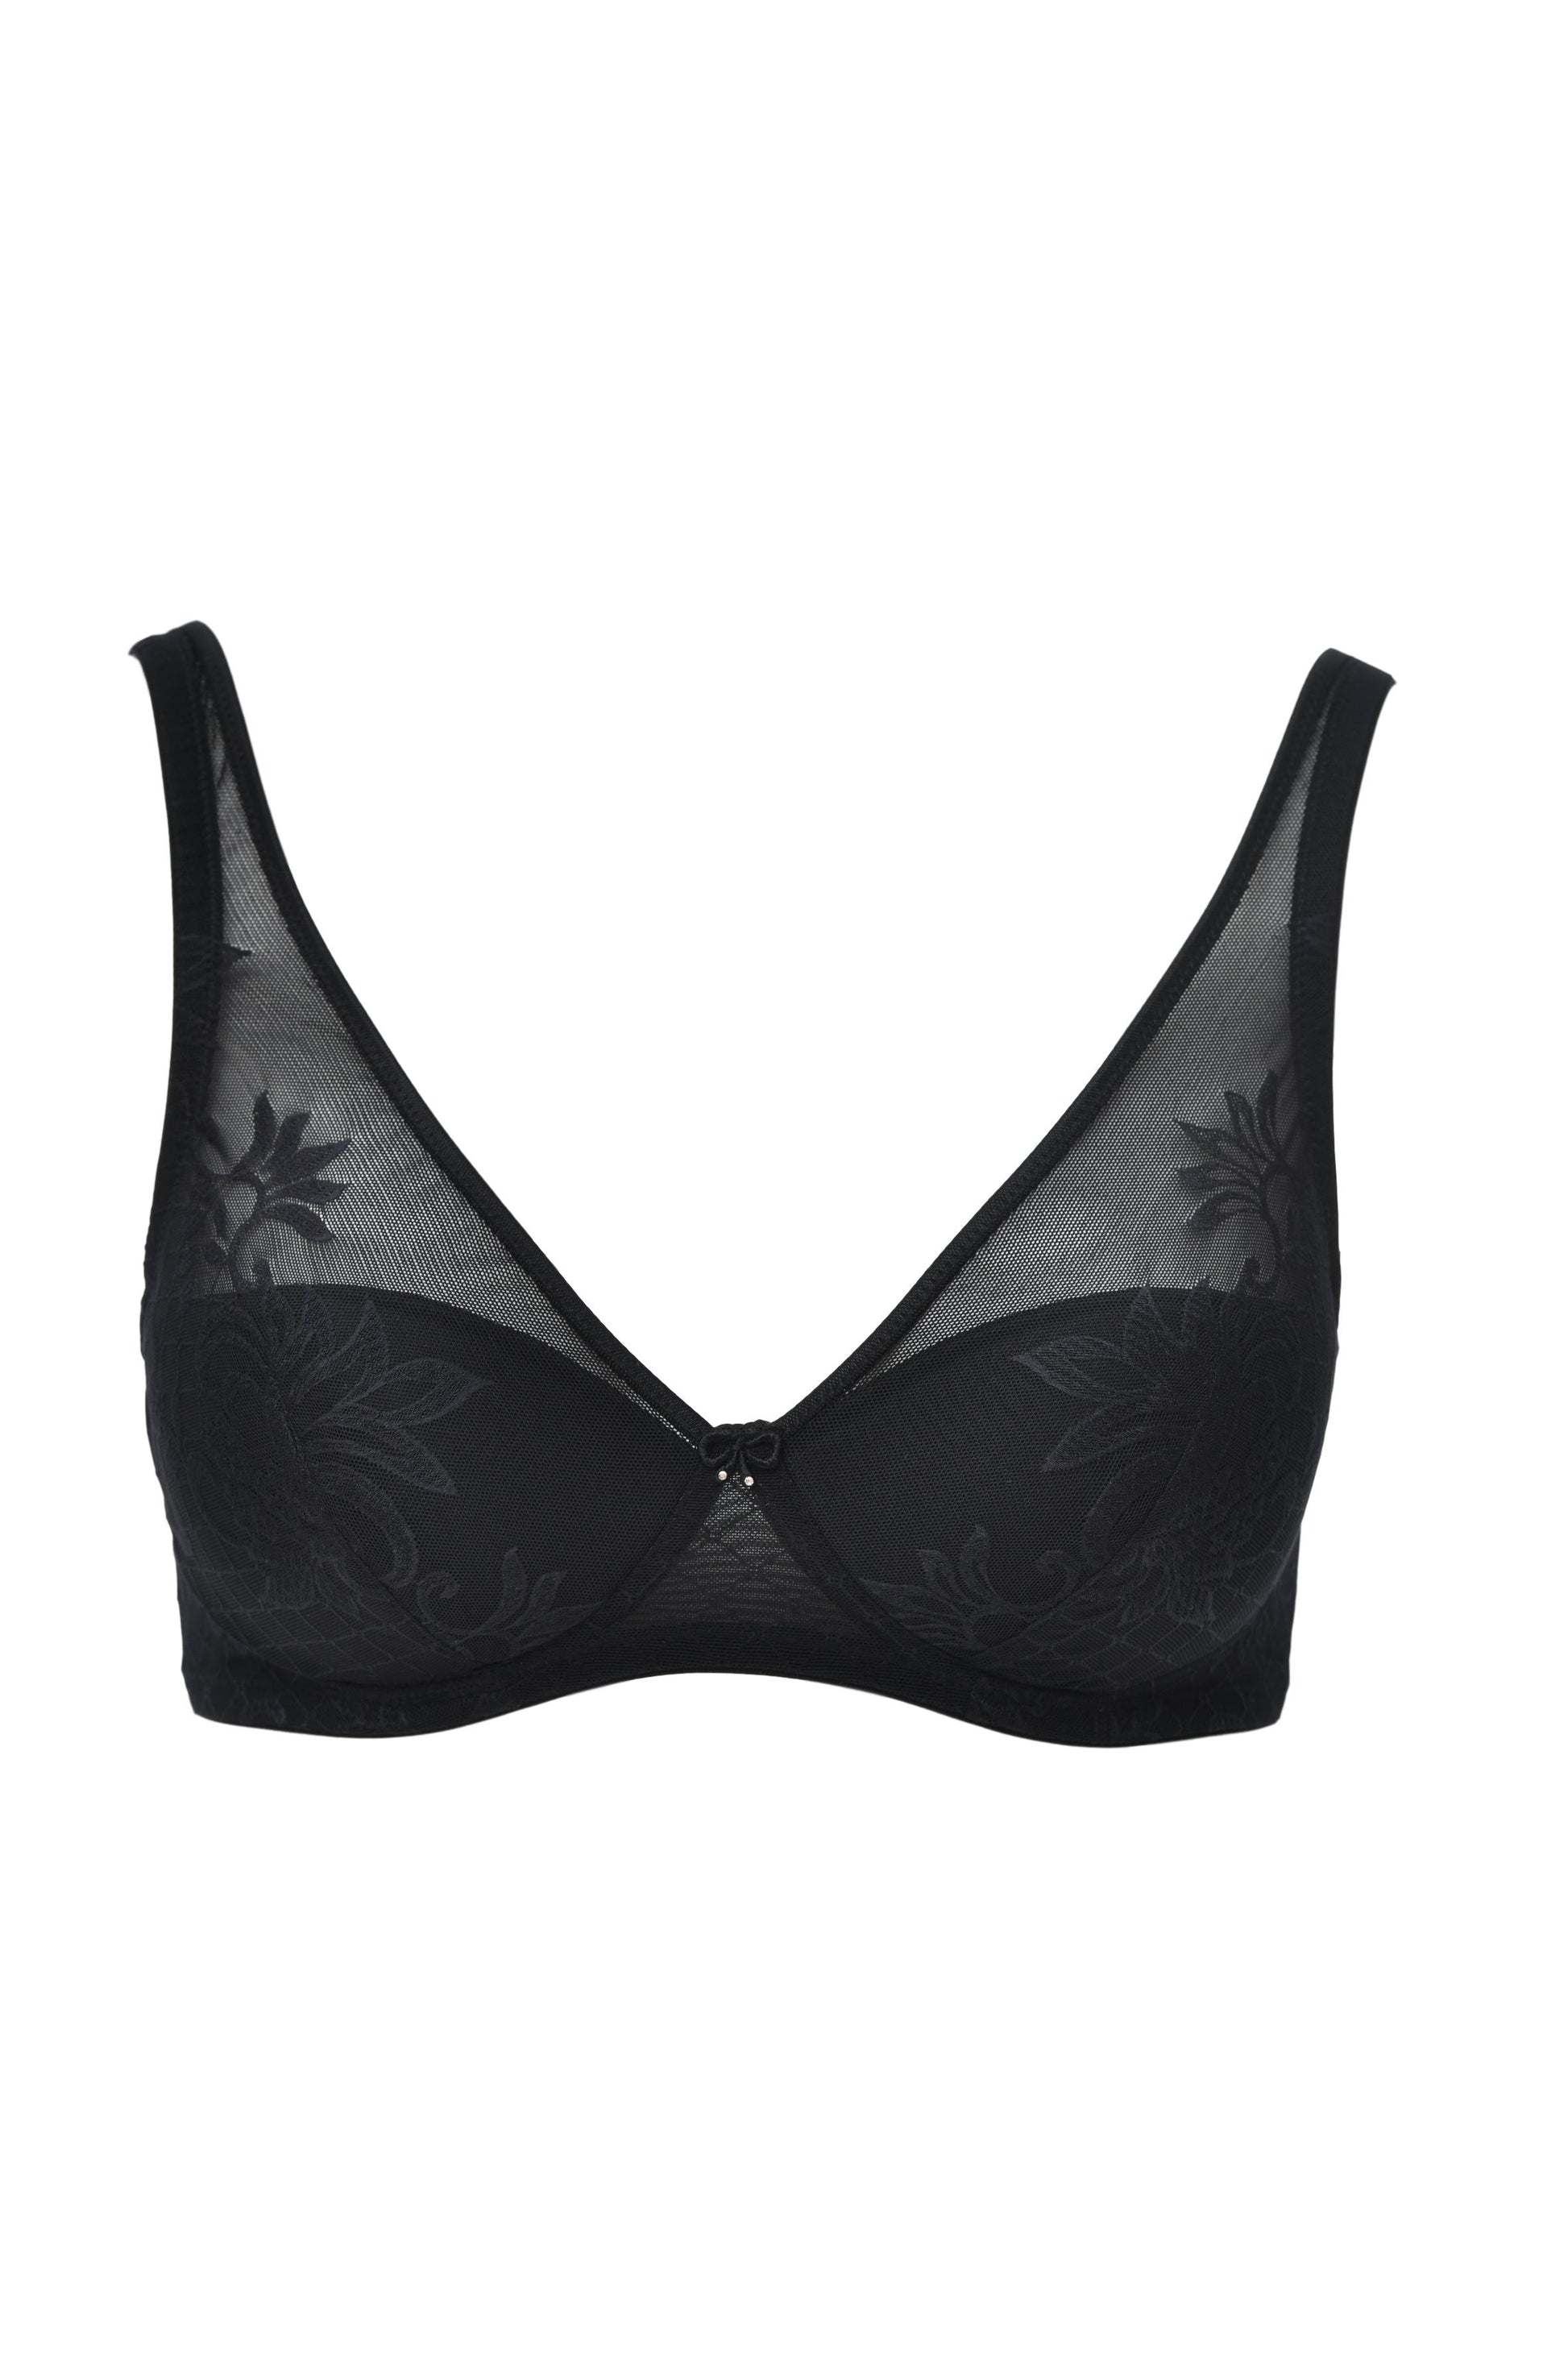 This Italian-crafted wireless bra from Leilieve's Free line utilizes a soft, elastic Jacquard fabric, featuring a distinctive amalgam of floral and geometric patterns. Light padding (approx. 3mm) is adjoined solely along the bottom of each cup's seam, allowing the fabric to adapt to the contours of the breast.  Full coverage, wire-free 